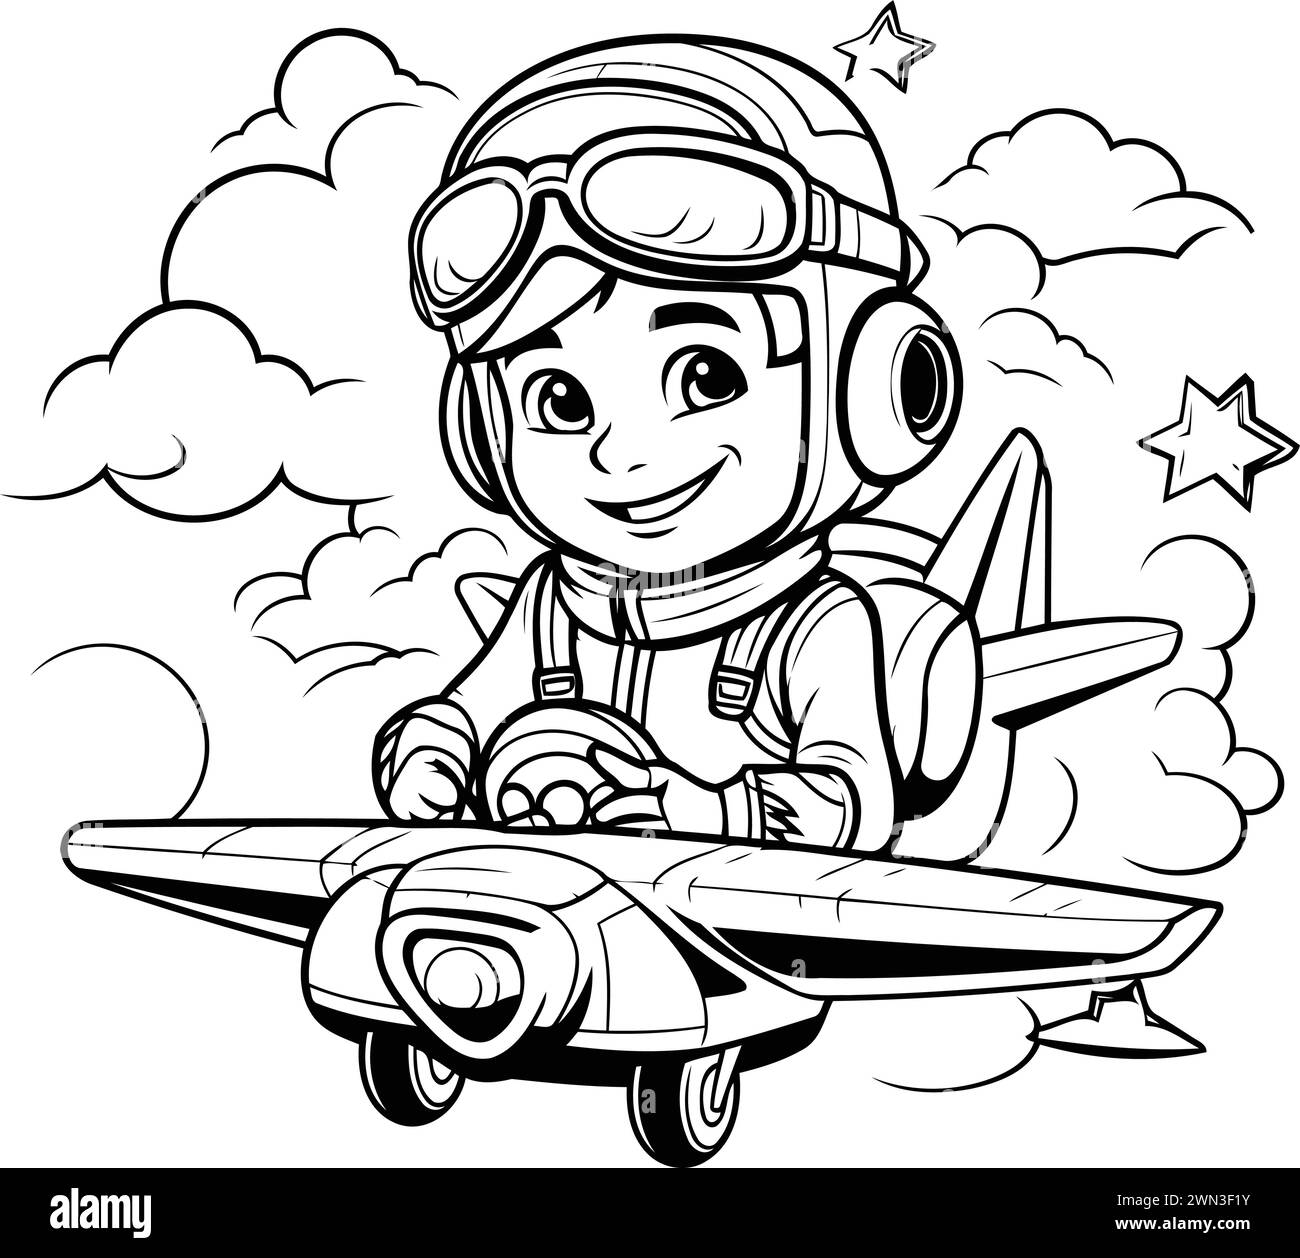 Cute cartoon pilot with airplane. Vector illustration for coloring book. Stock Vector